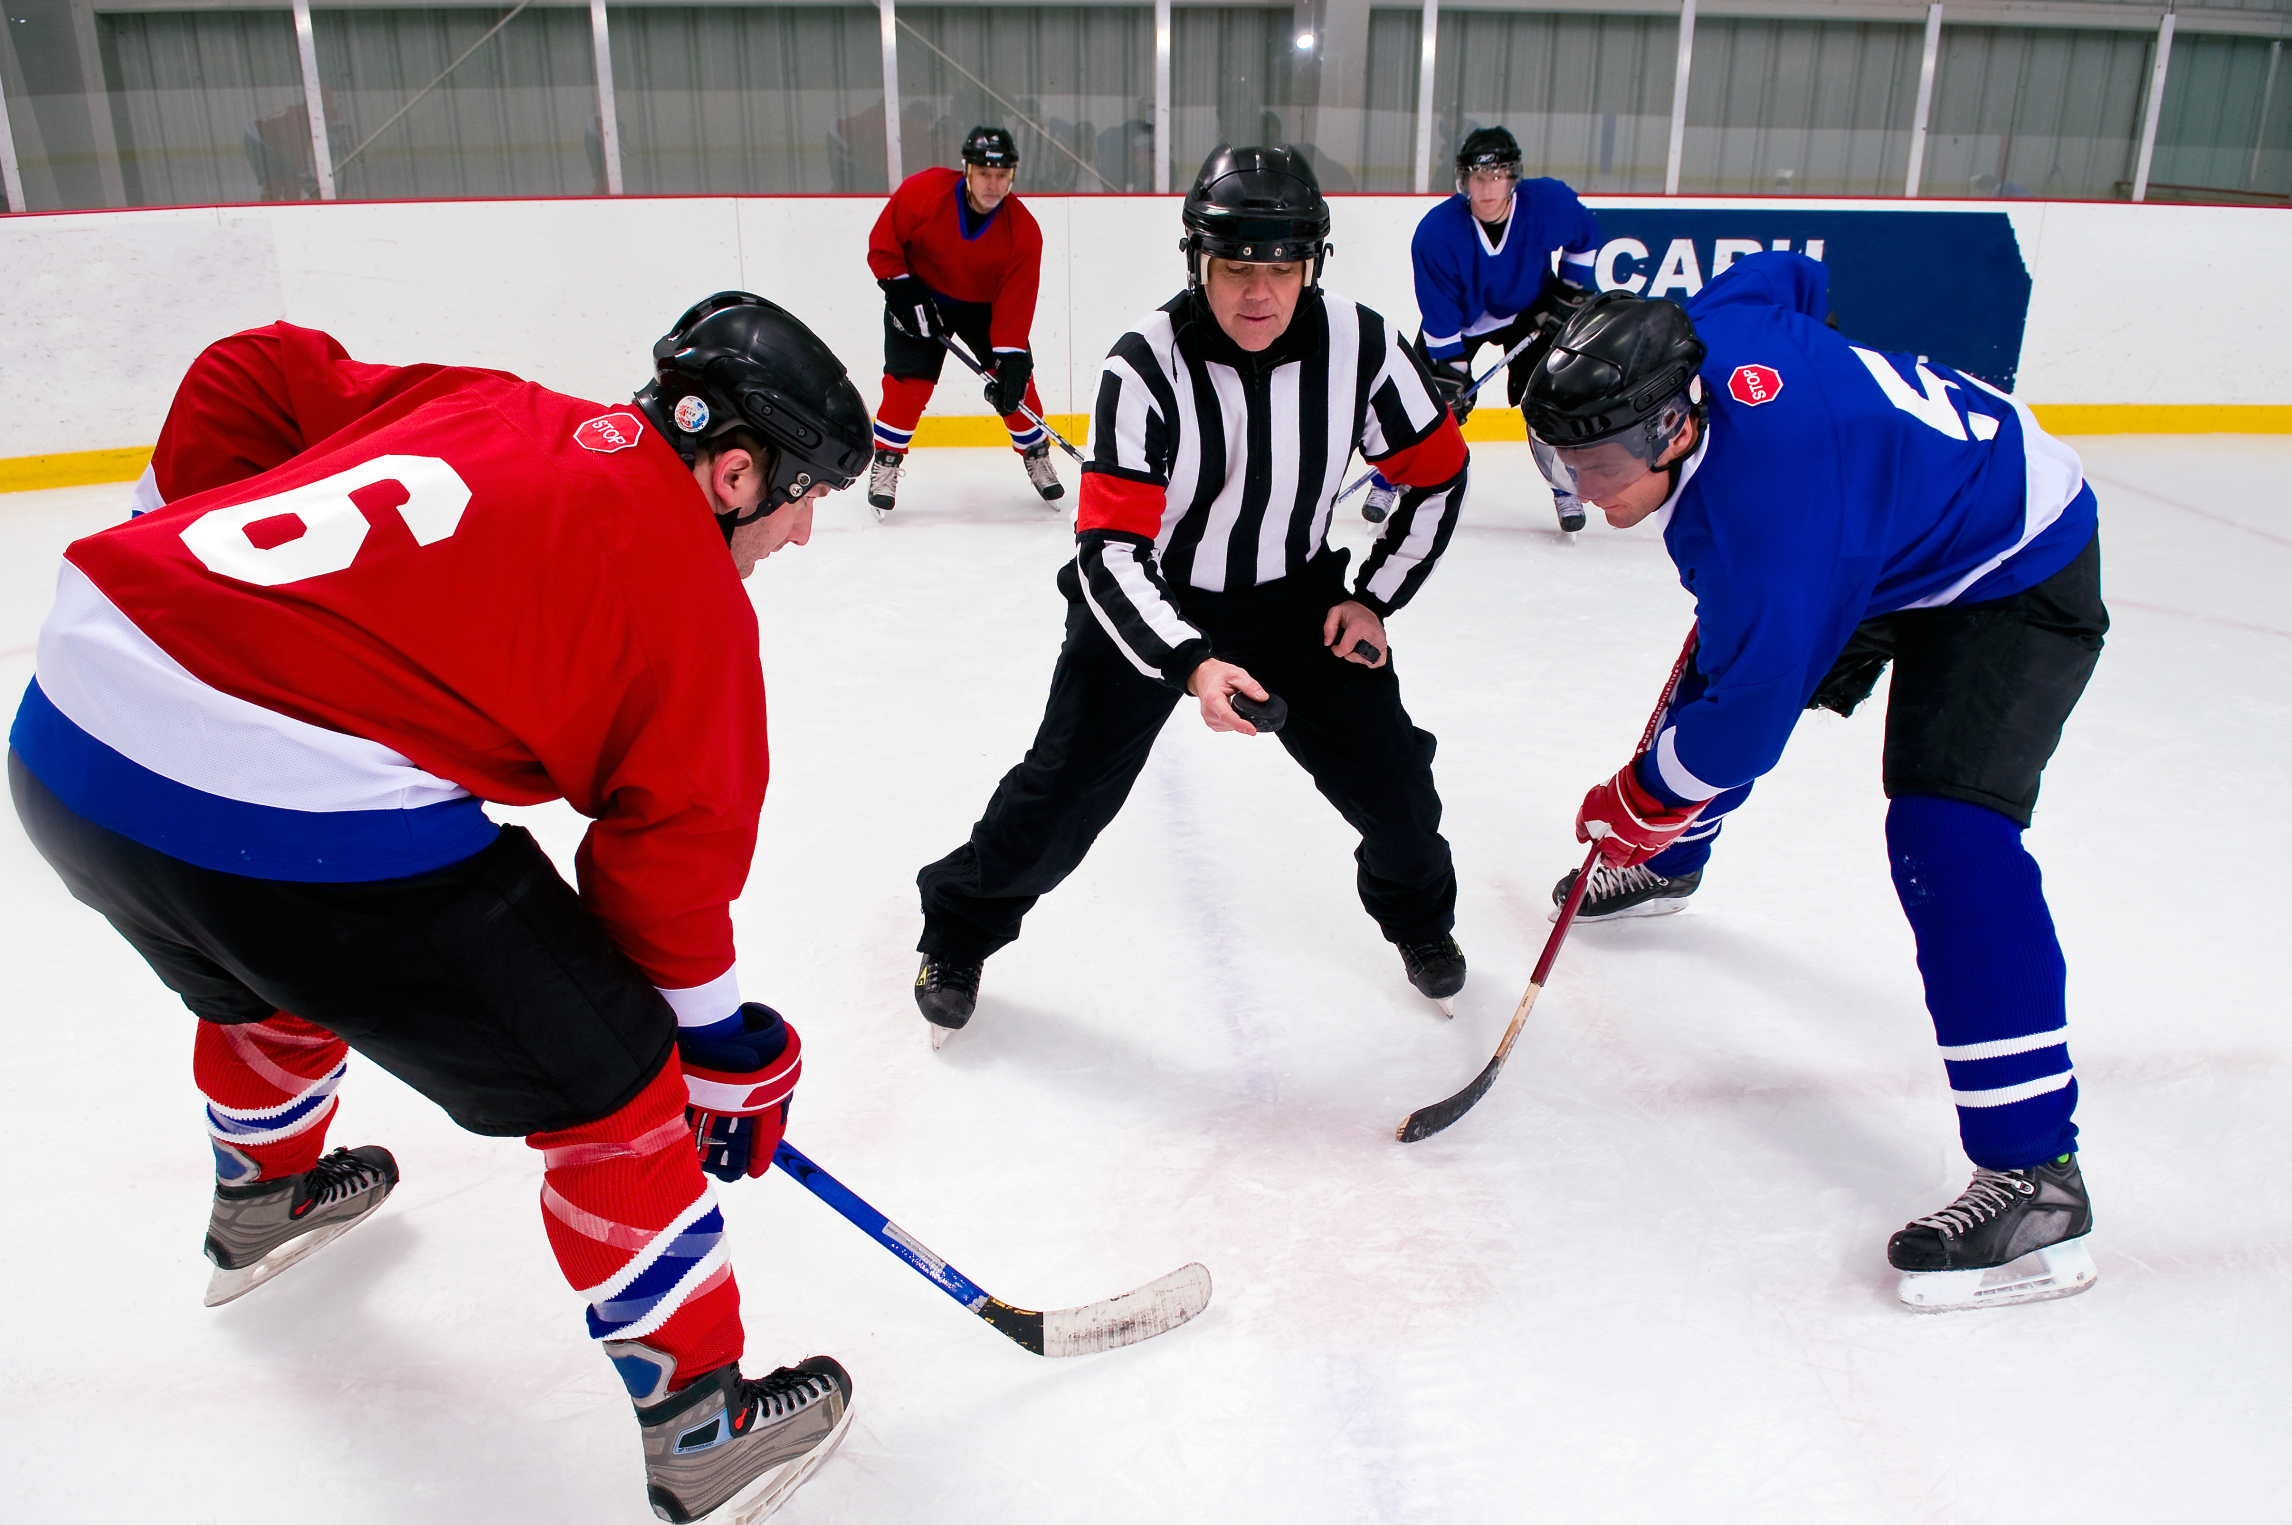 Hockey players at face-off